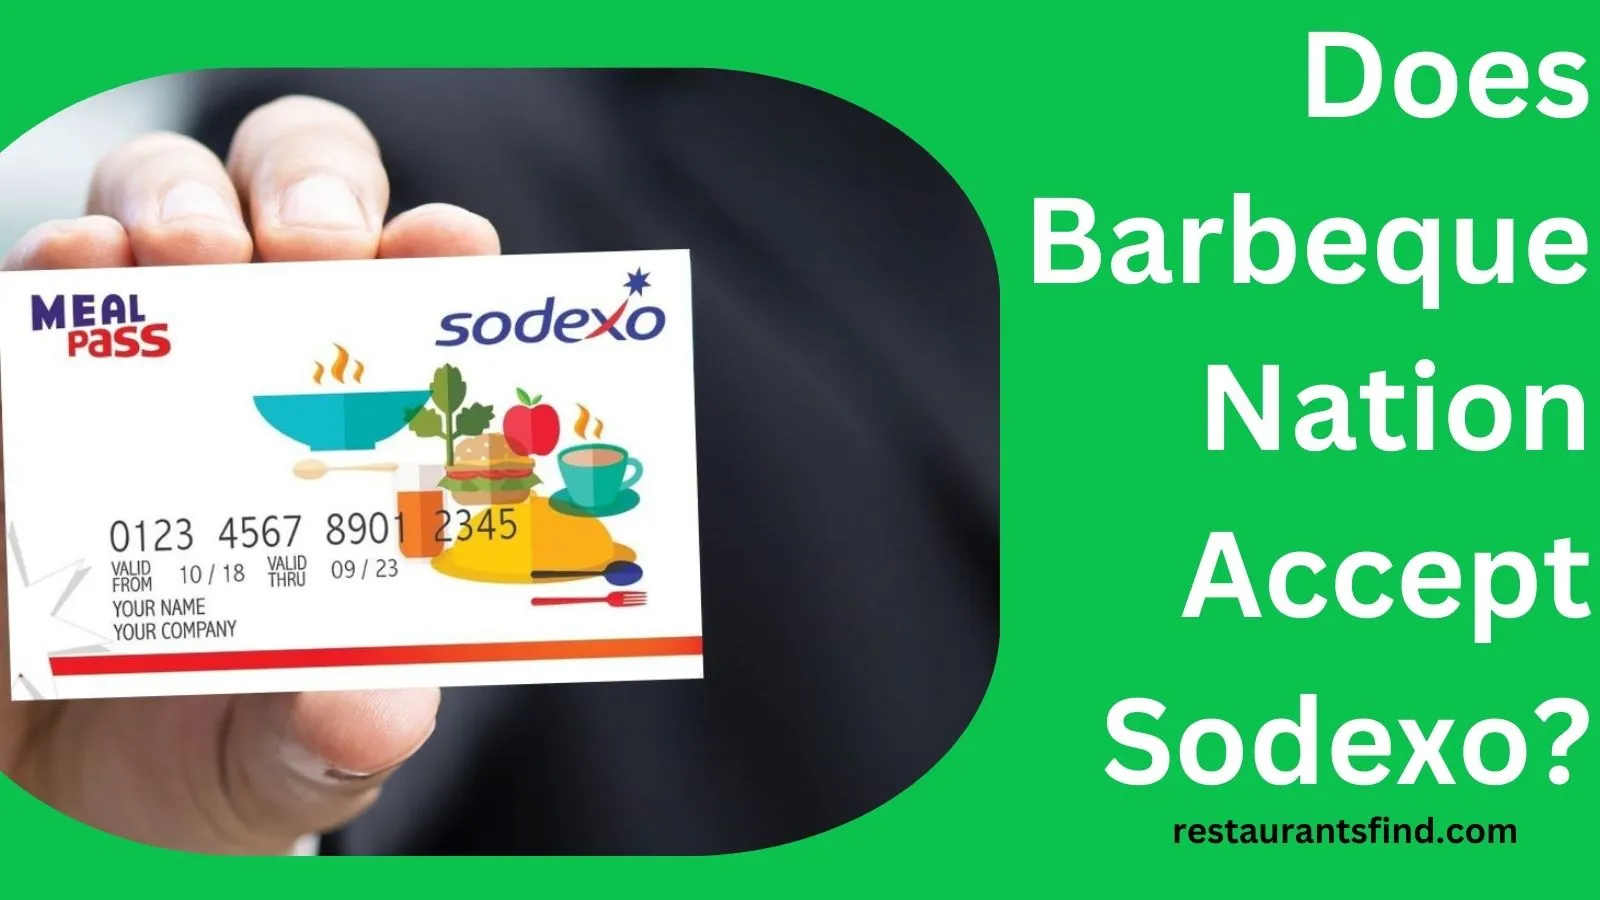 Does Barbeque Nation Accept Sodexo, Payment Policies at Barbeque Nation, Barbeque Nation takes Sodexo,